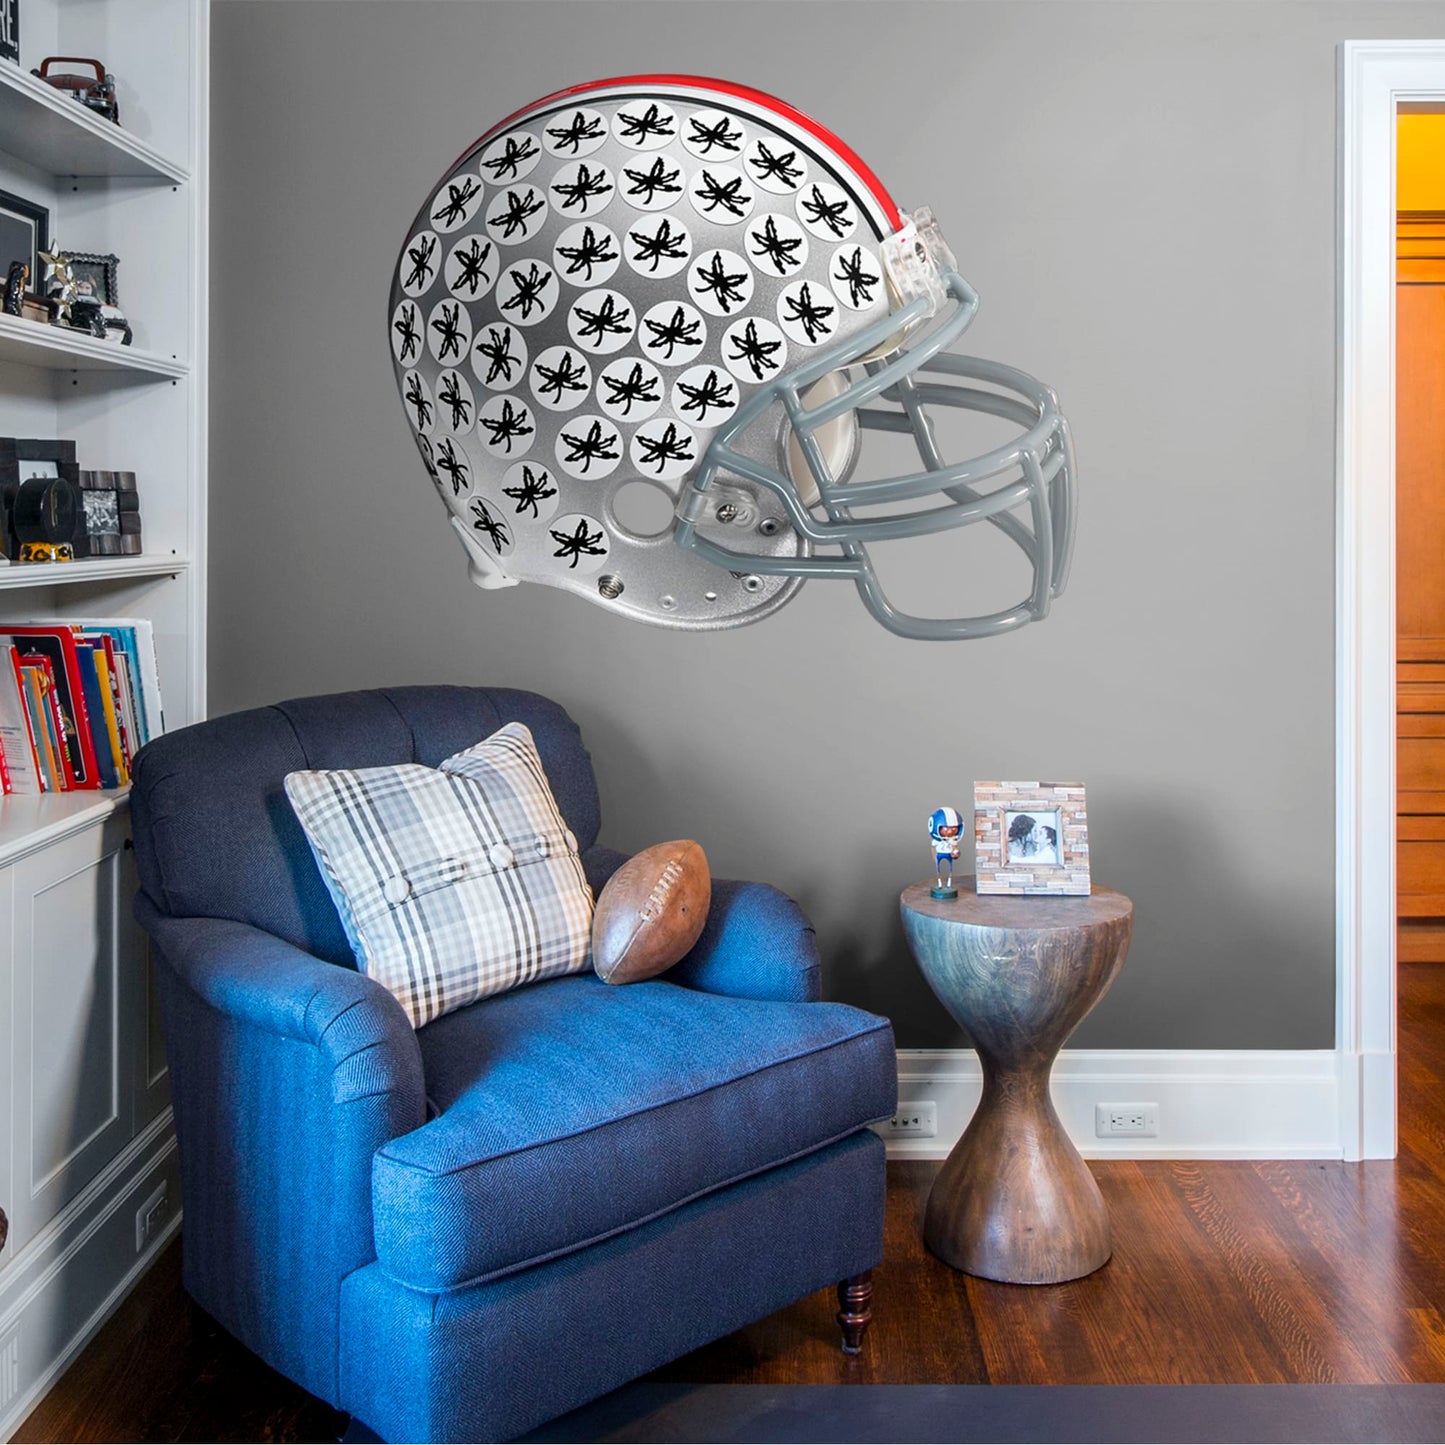 OSU Helmet (A305) – Lovely Paperie & Gifts